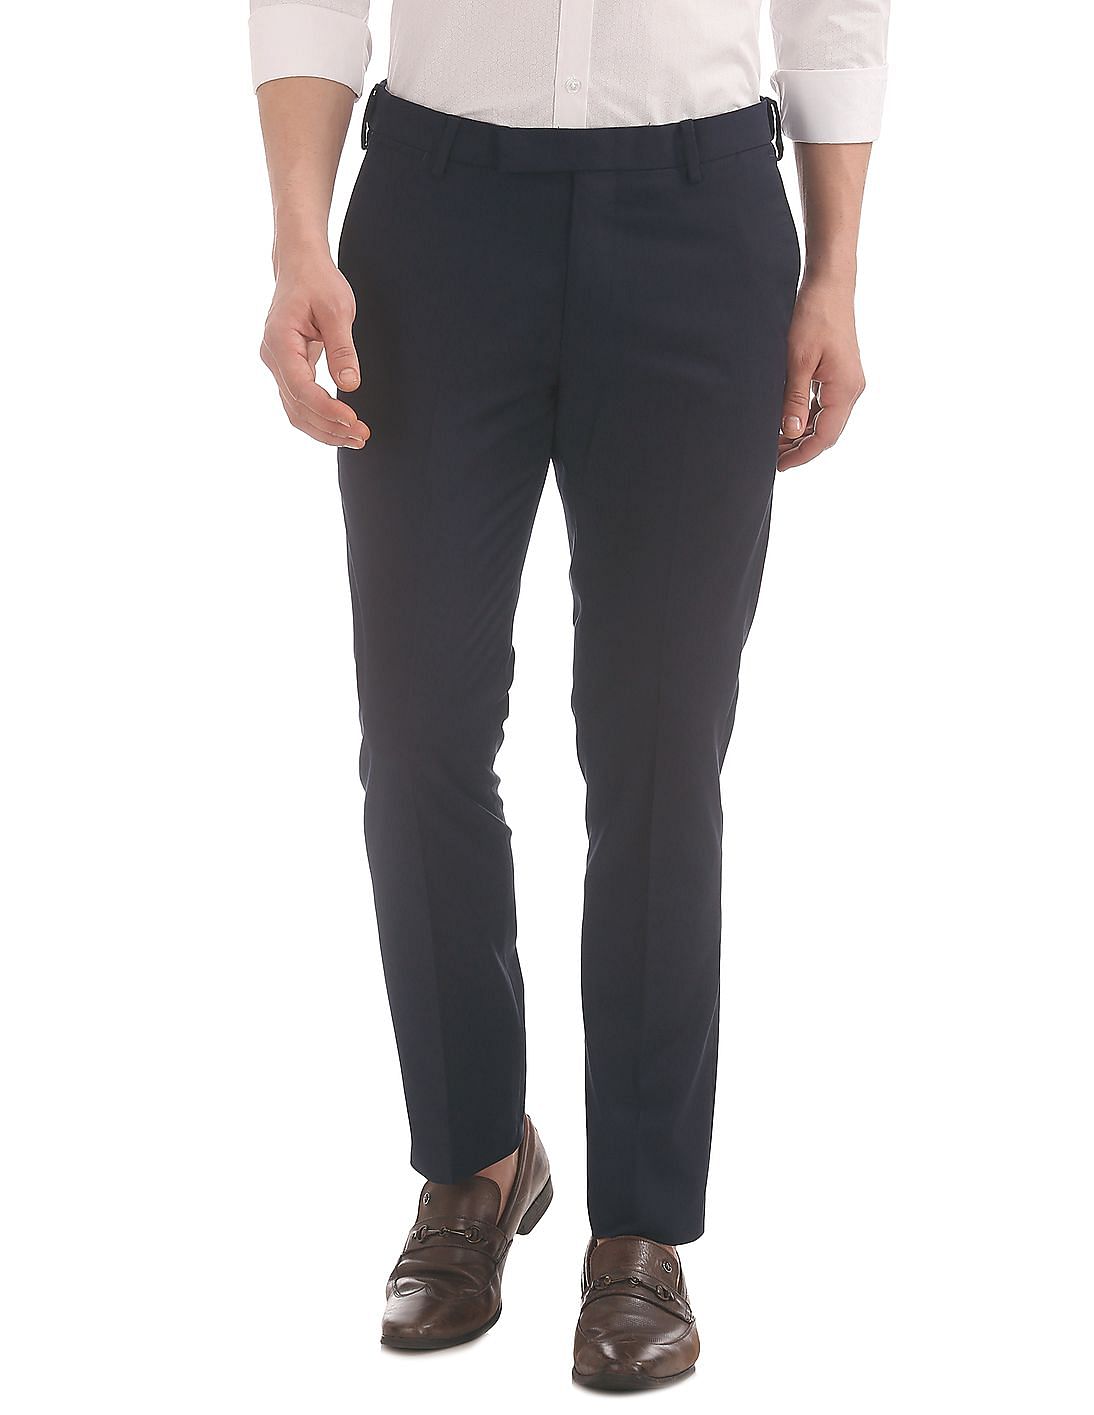 Expanding waist trousers for all day comfort and style